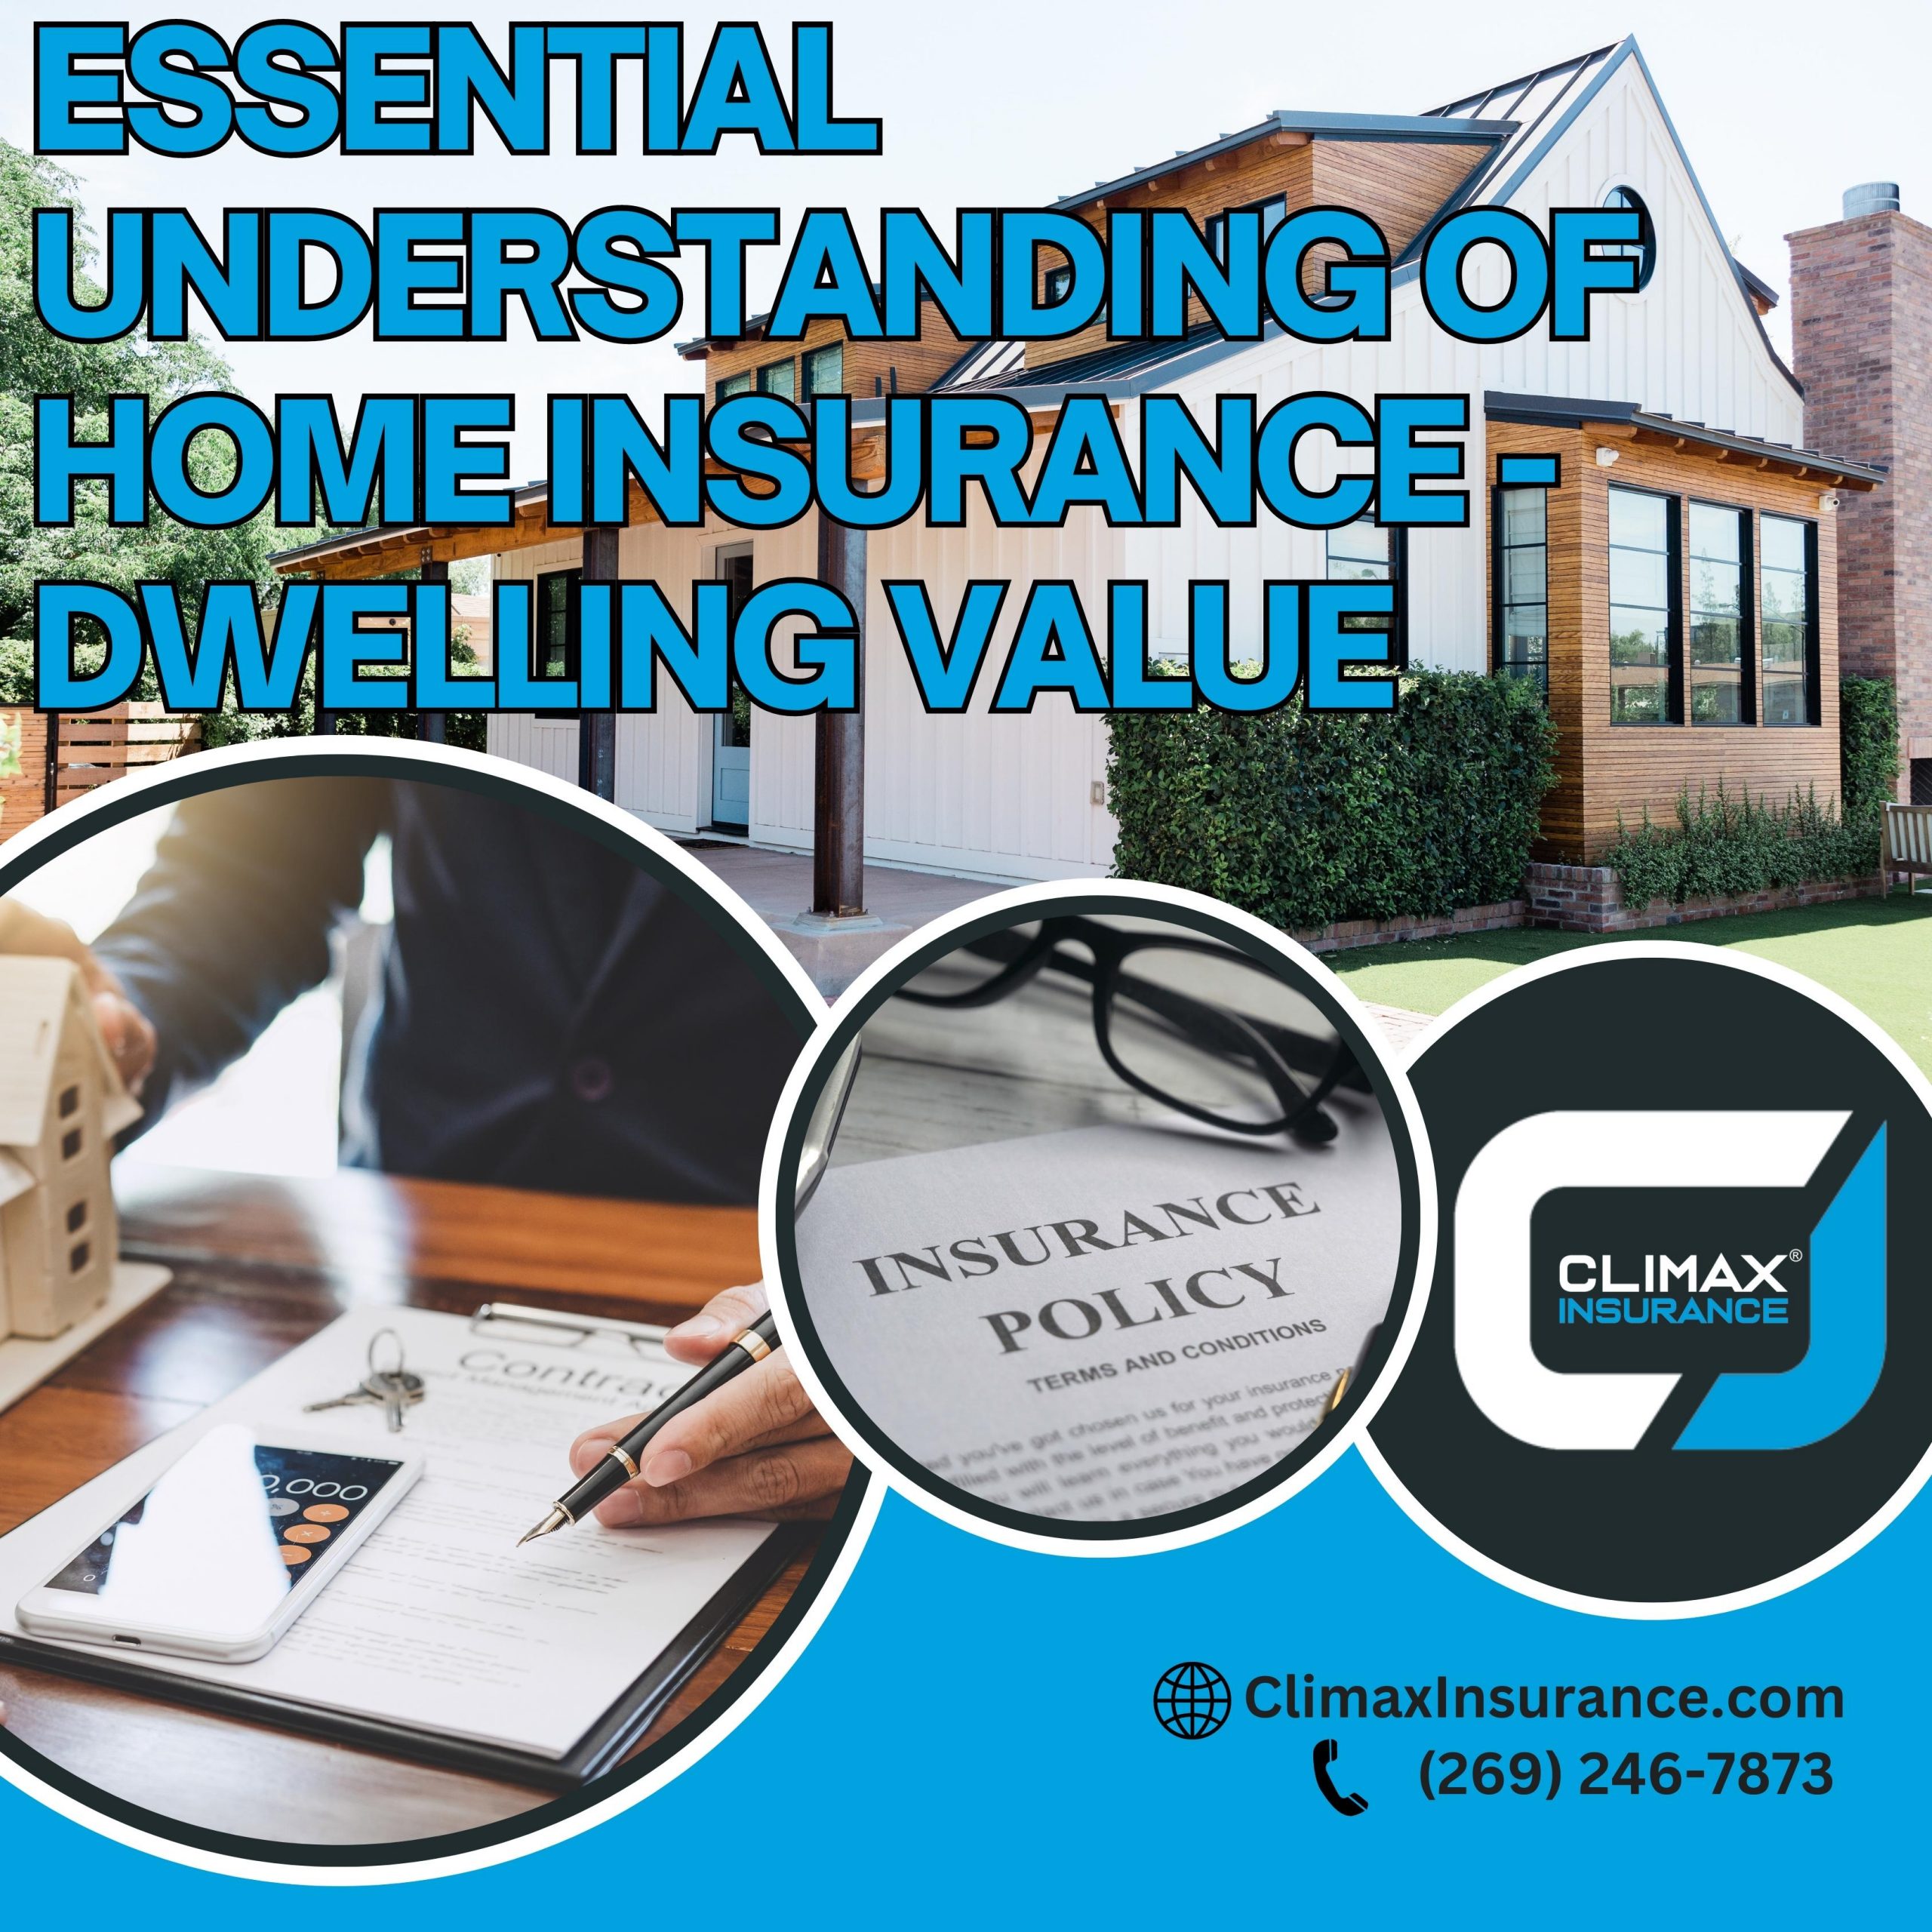 Essential Understanding of Home Insurance – Dwelling Value: A Michigan Perspective